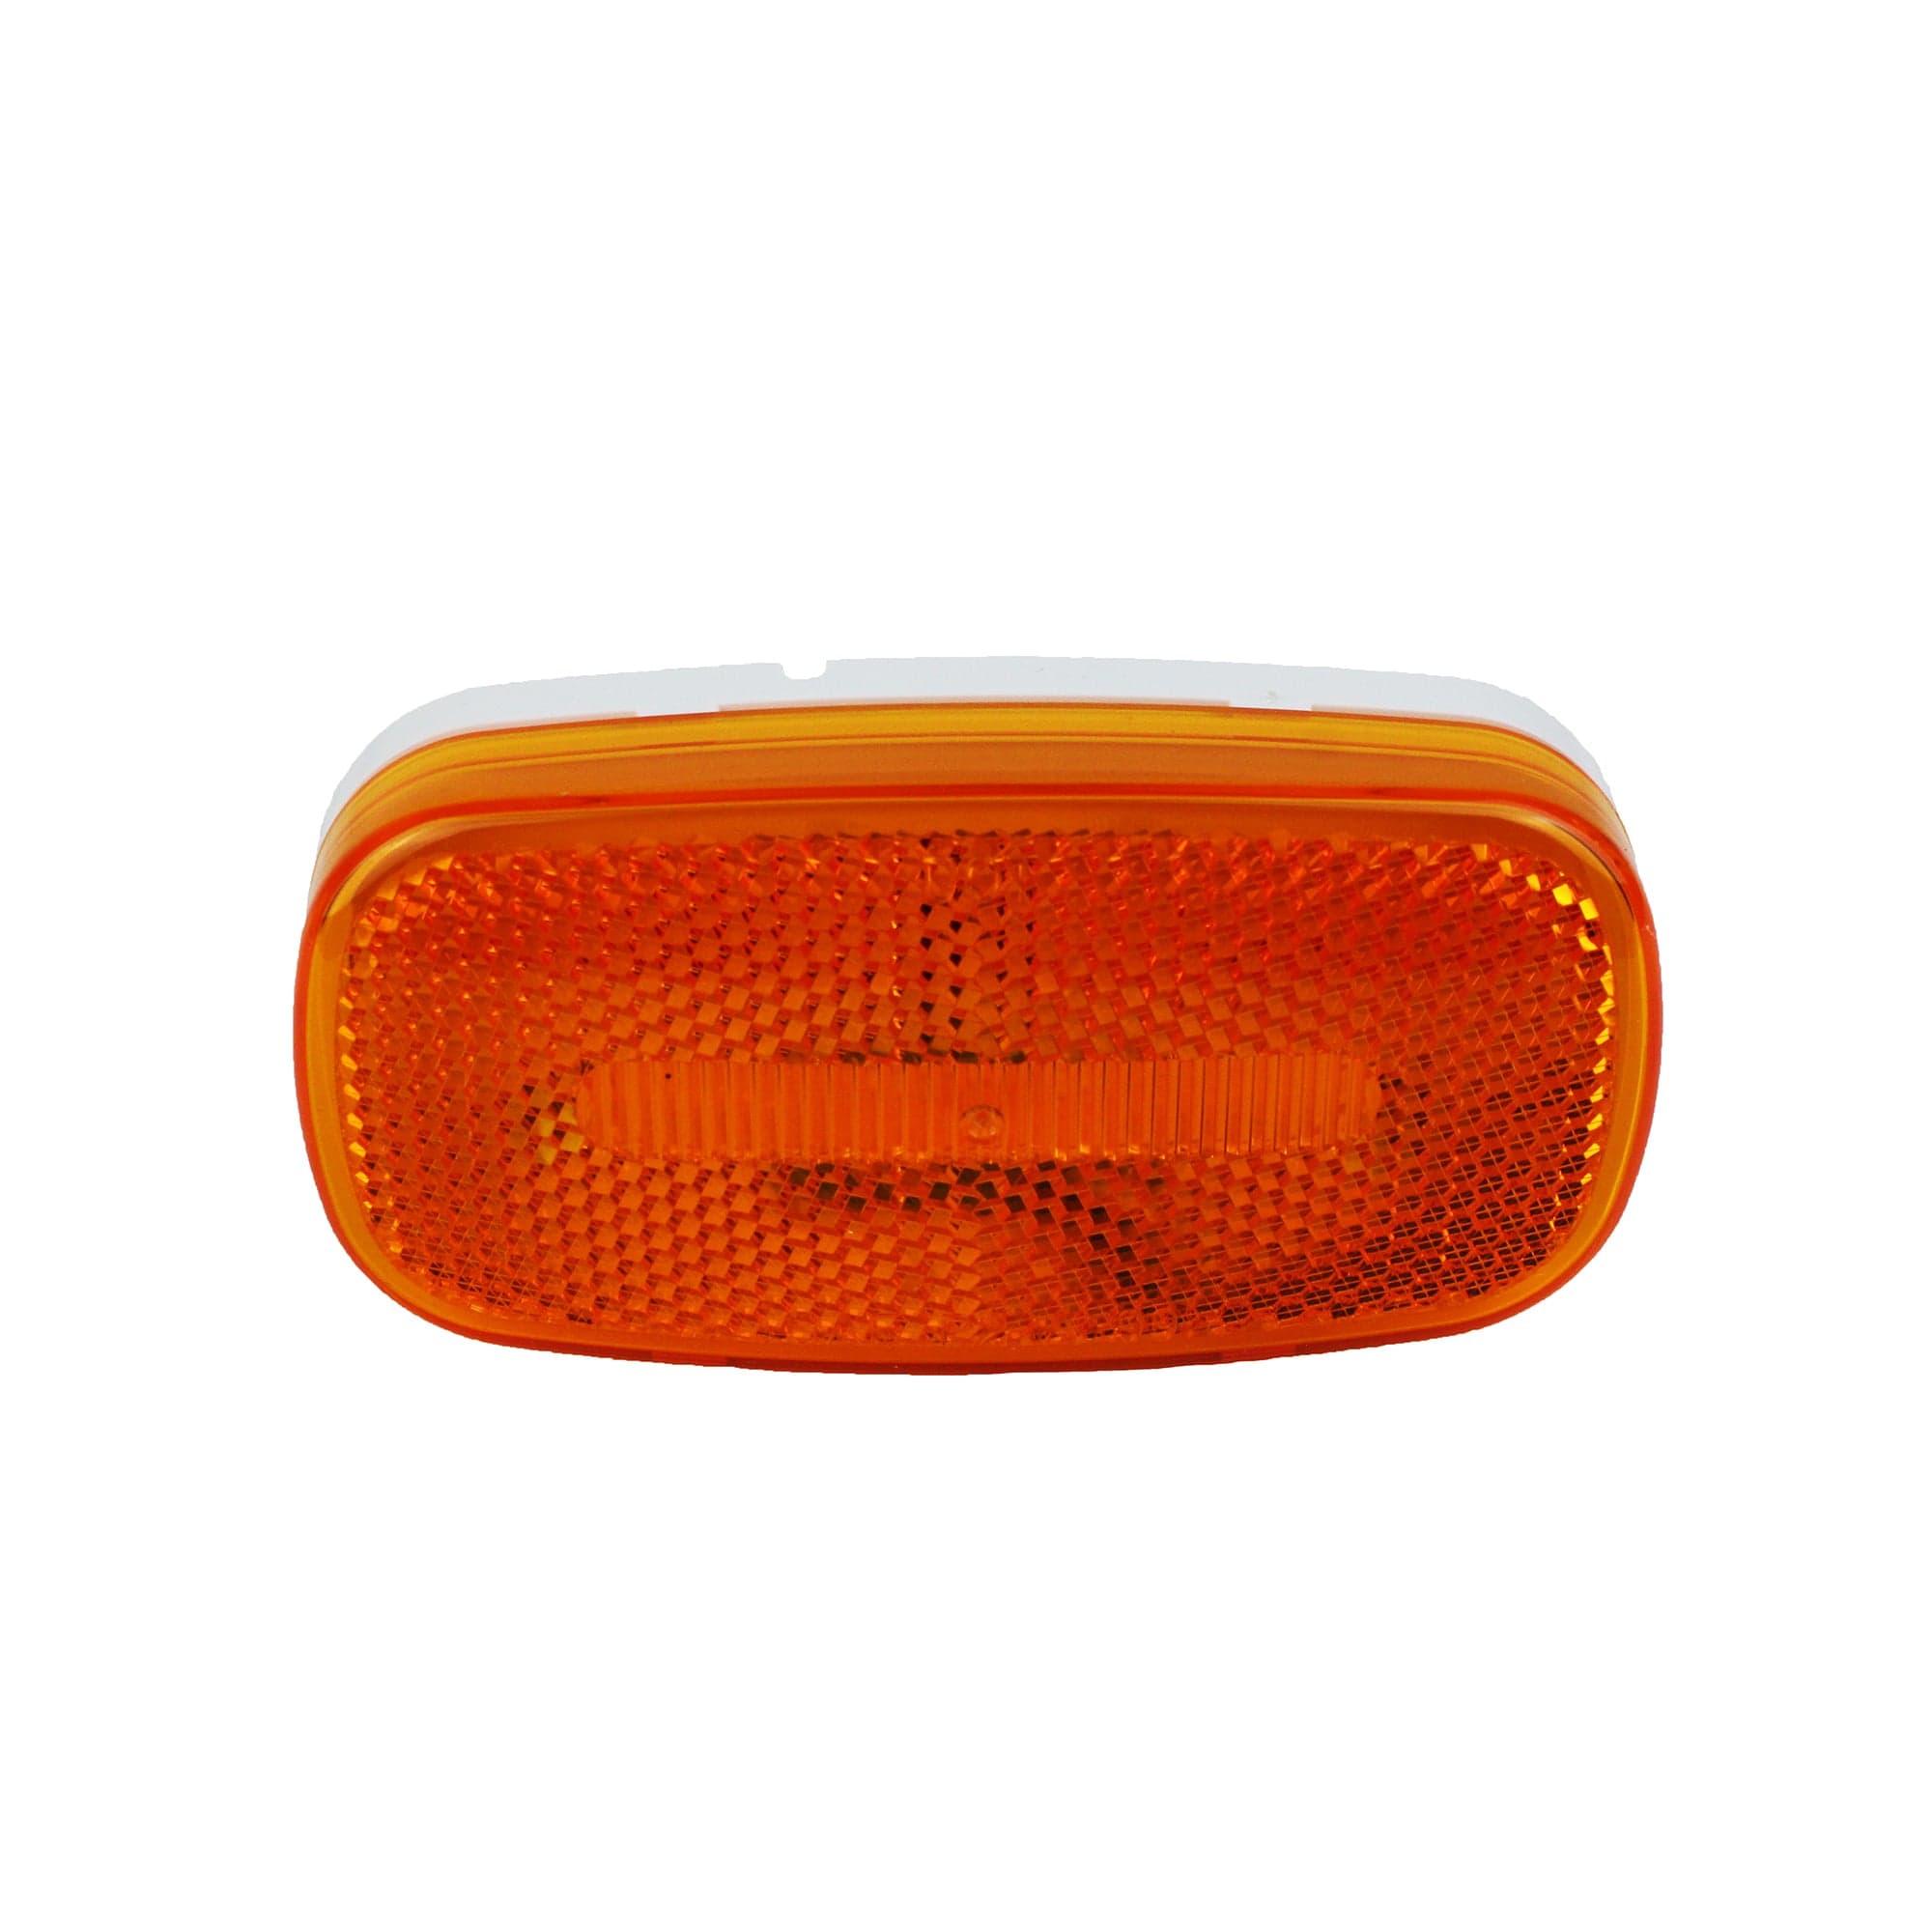 Anderson Marine / Peterson MFG V180A Oval LED Side Marker/Clearance Light W/ Reflex 4.13"x2.0" - Amber